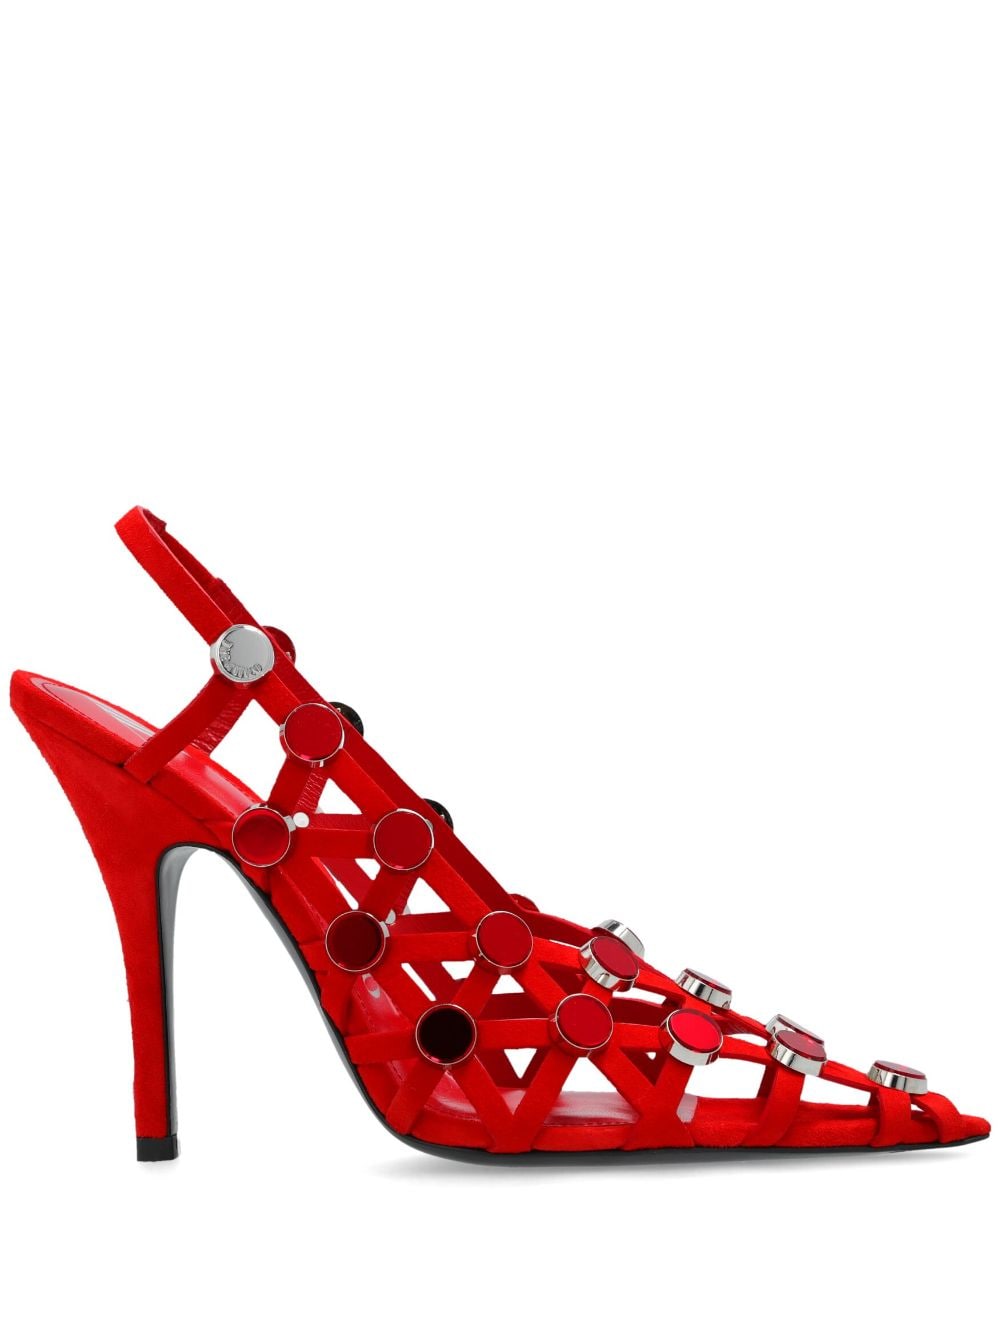 Attico Grid 105mm Leather Pumps In Red